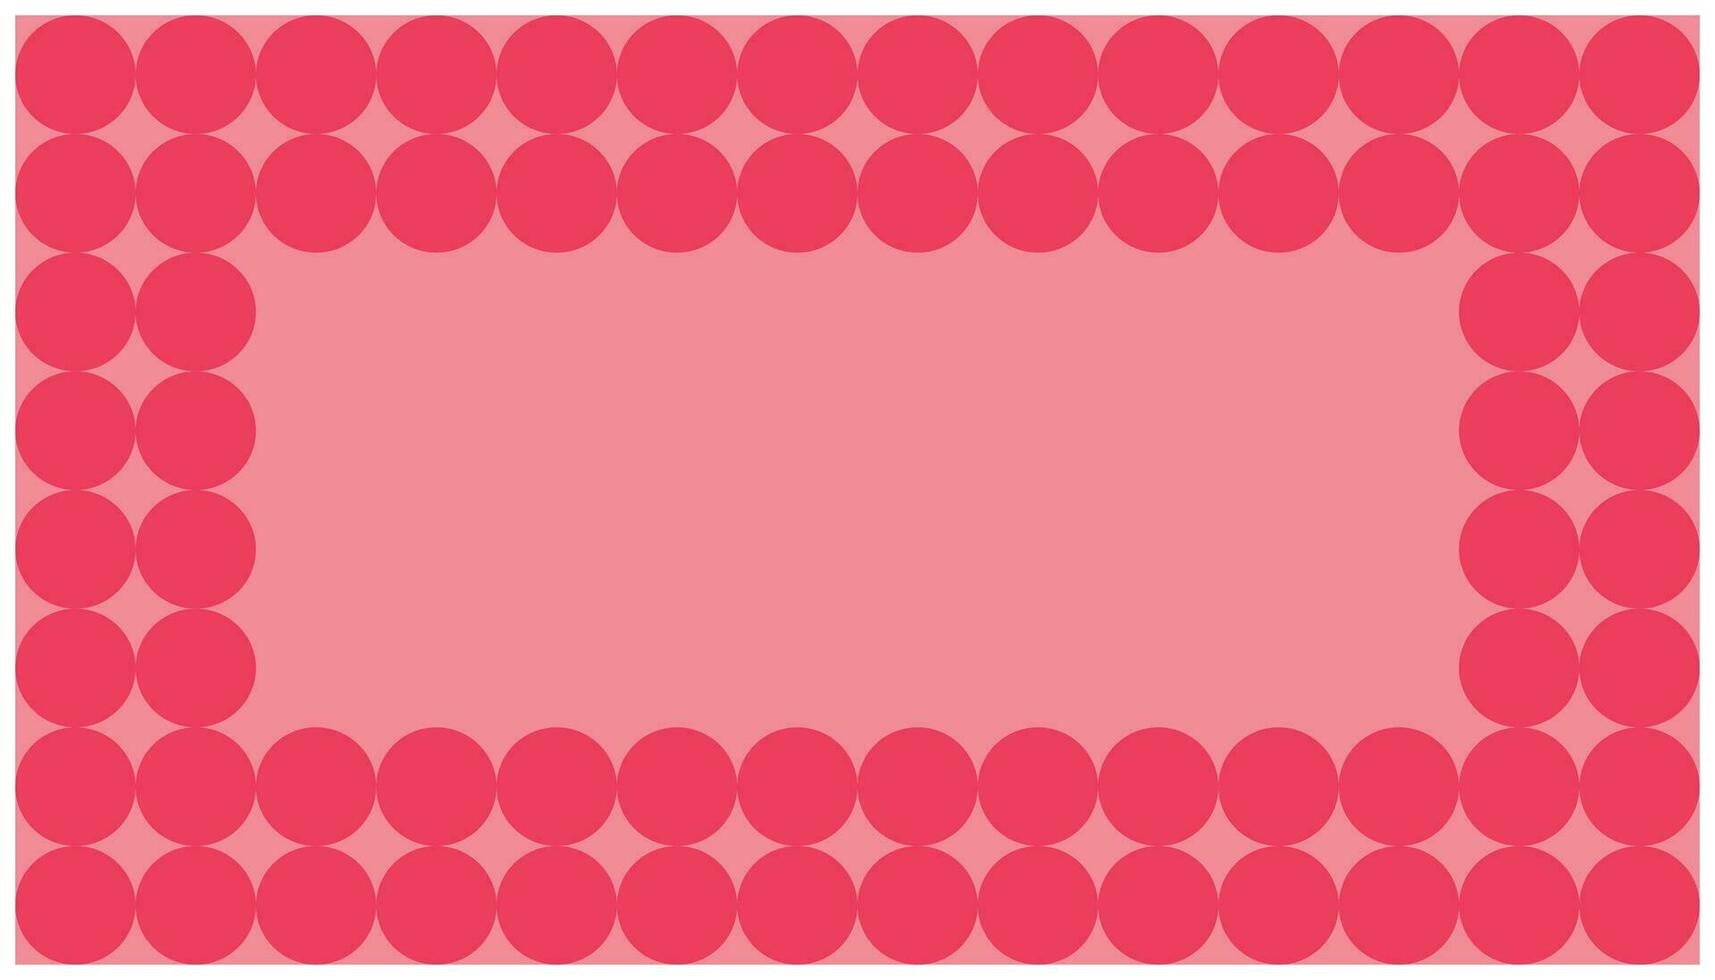 Pink polka dot background. Abstract background with circles in pink and red colors. Vector illustration.